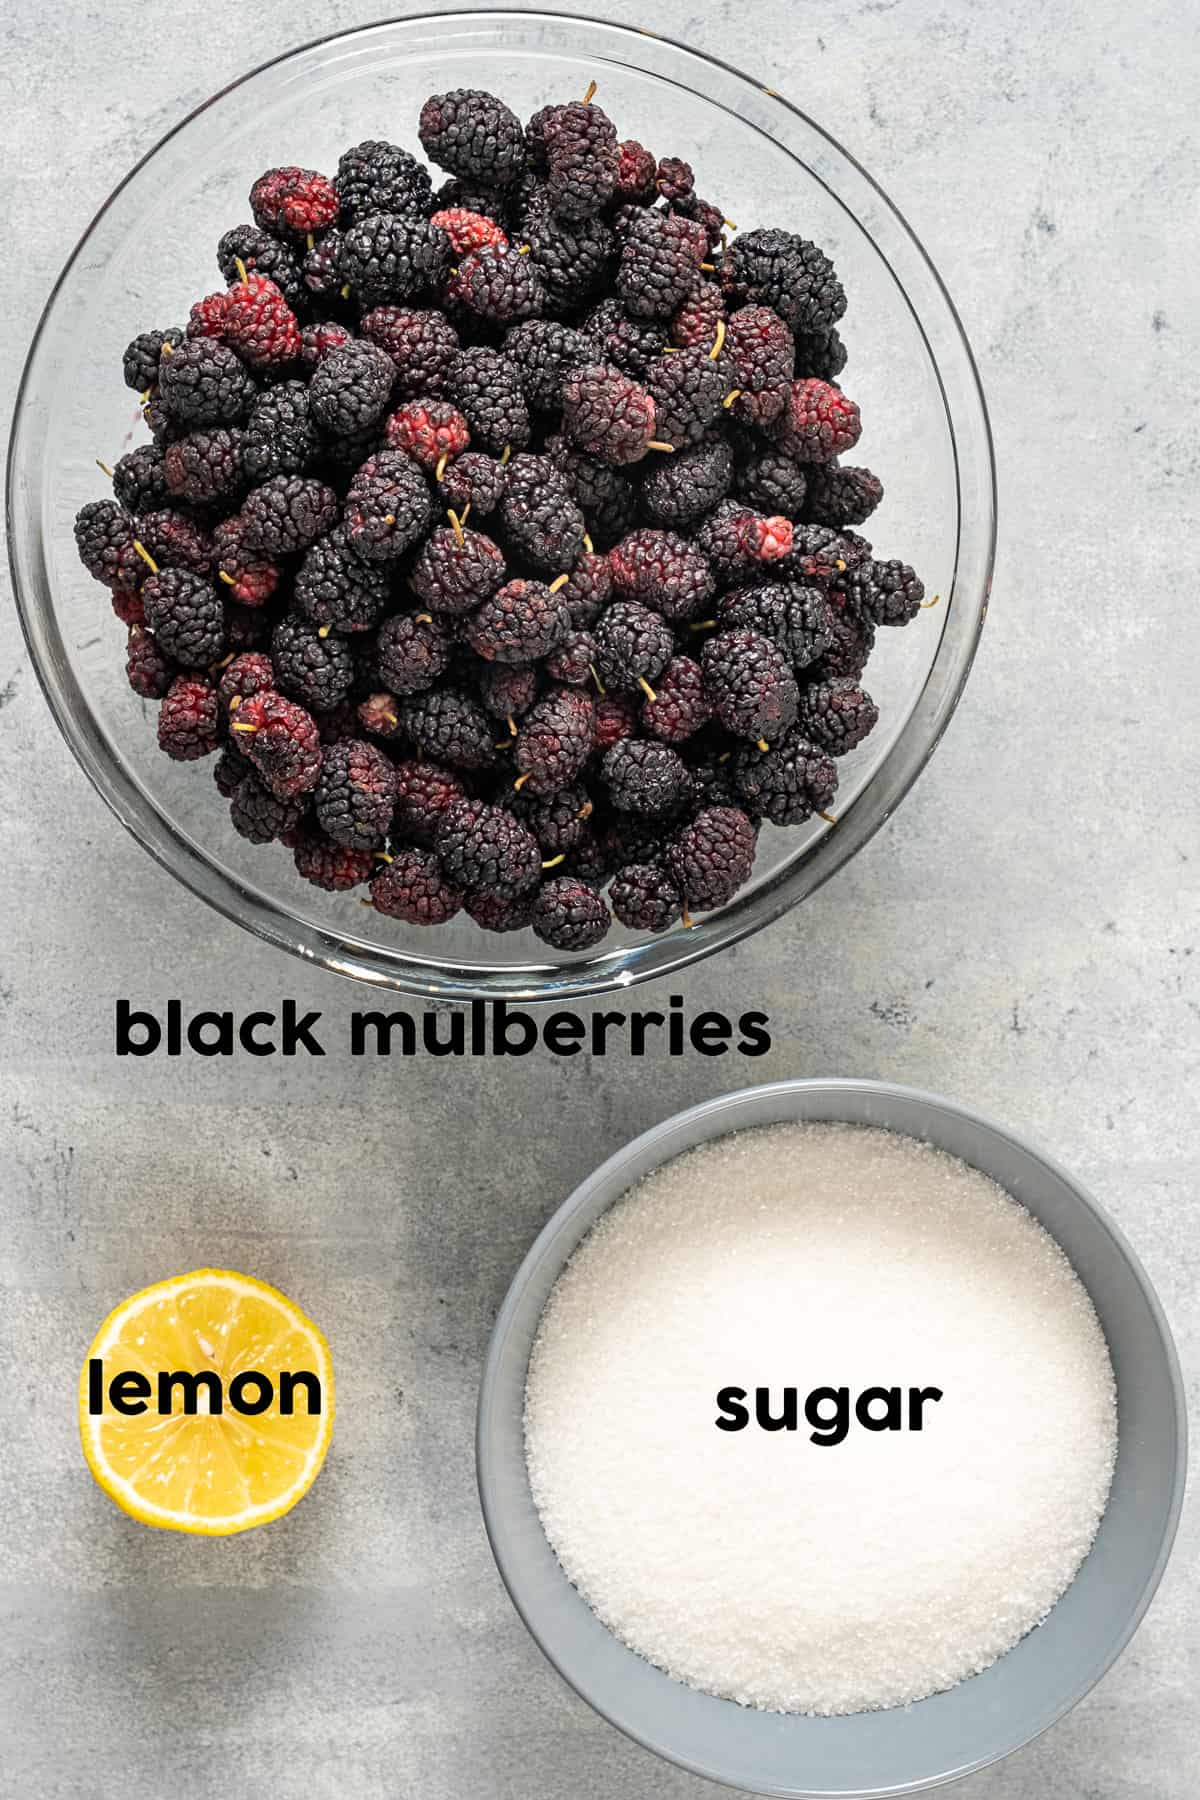 Fresh black mulberries in a bowl, half lemon and a bowl of sugar on a grey background.